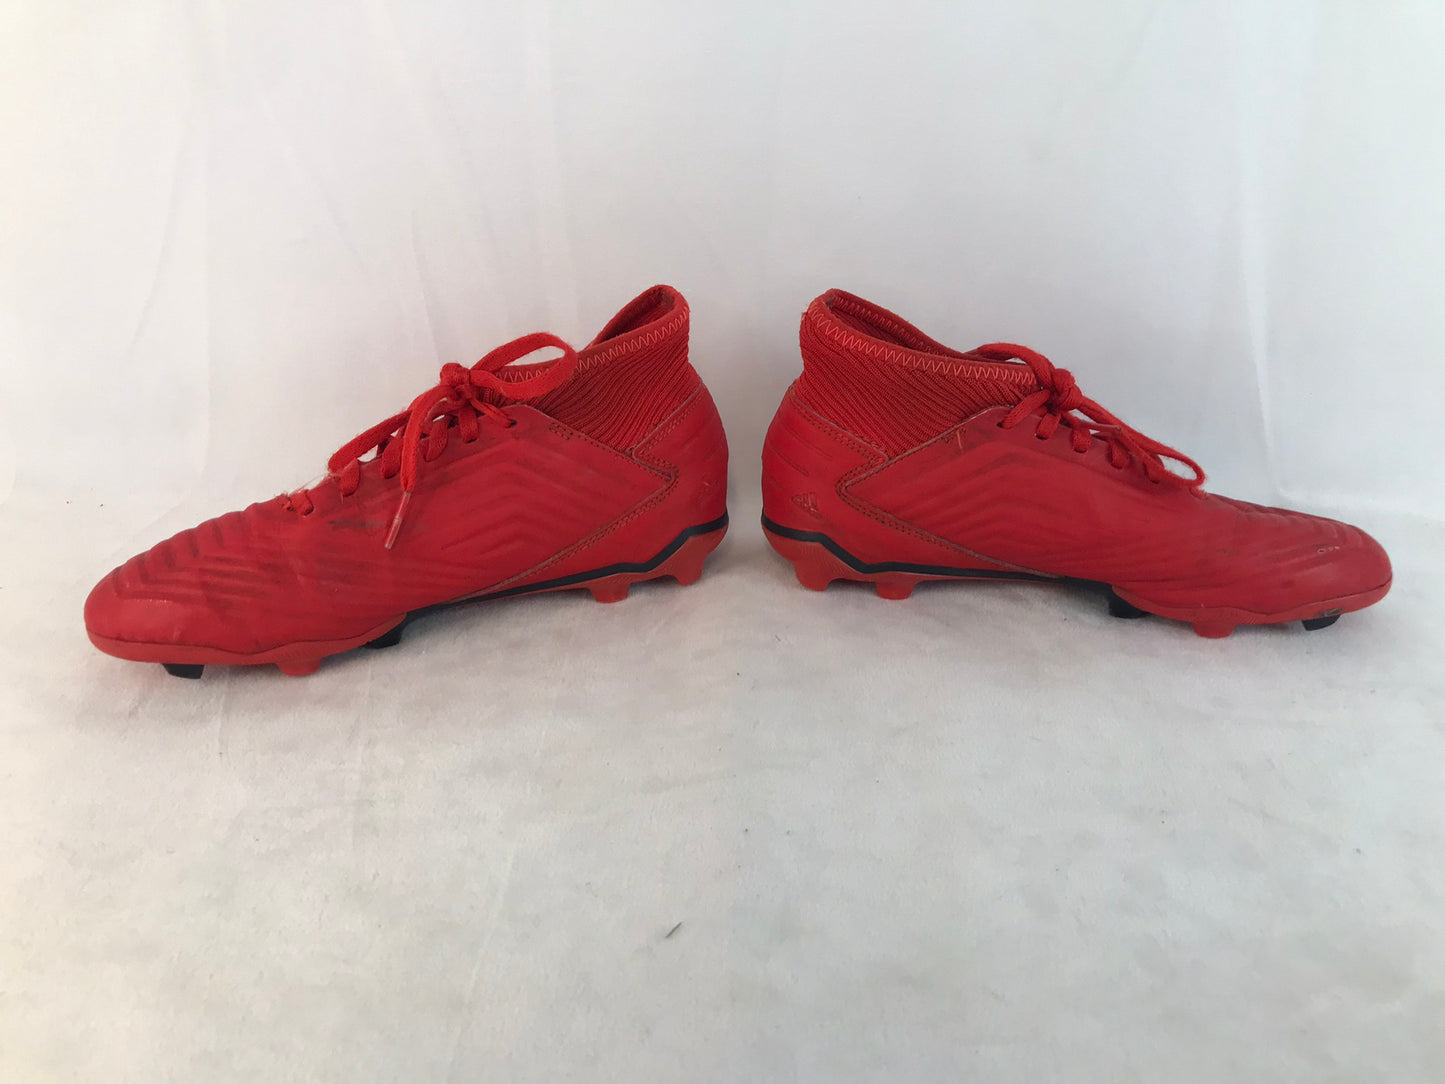 Soccer Shoes Cleats Child Size 3.5 Nike Preditor Red Orange Minor Marks